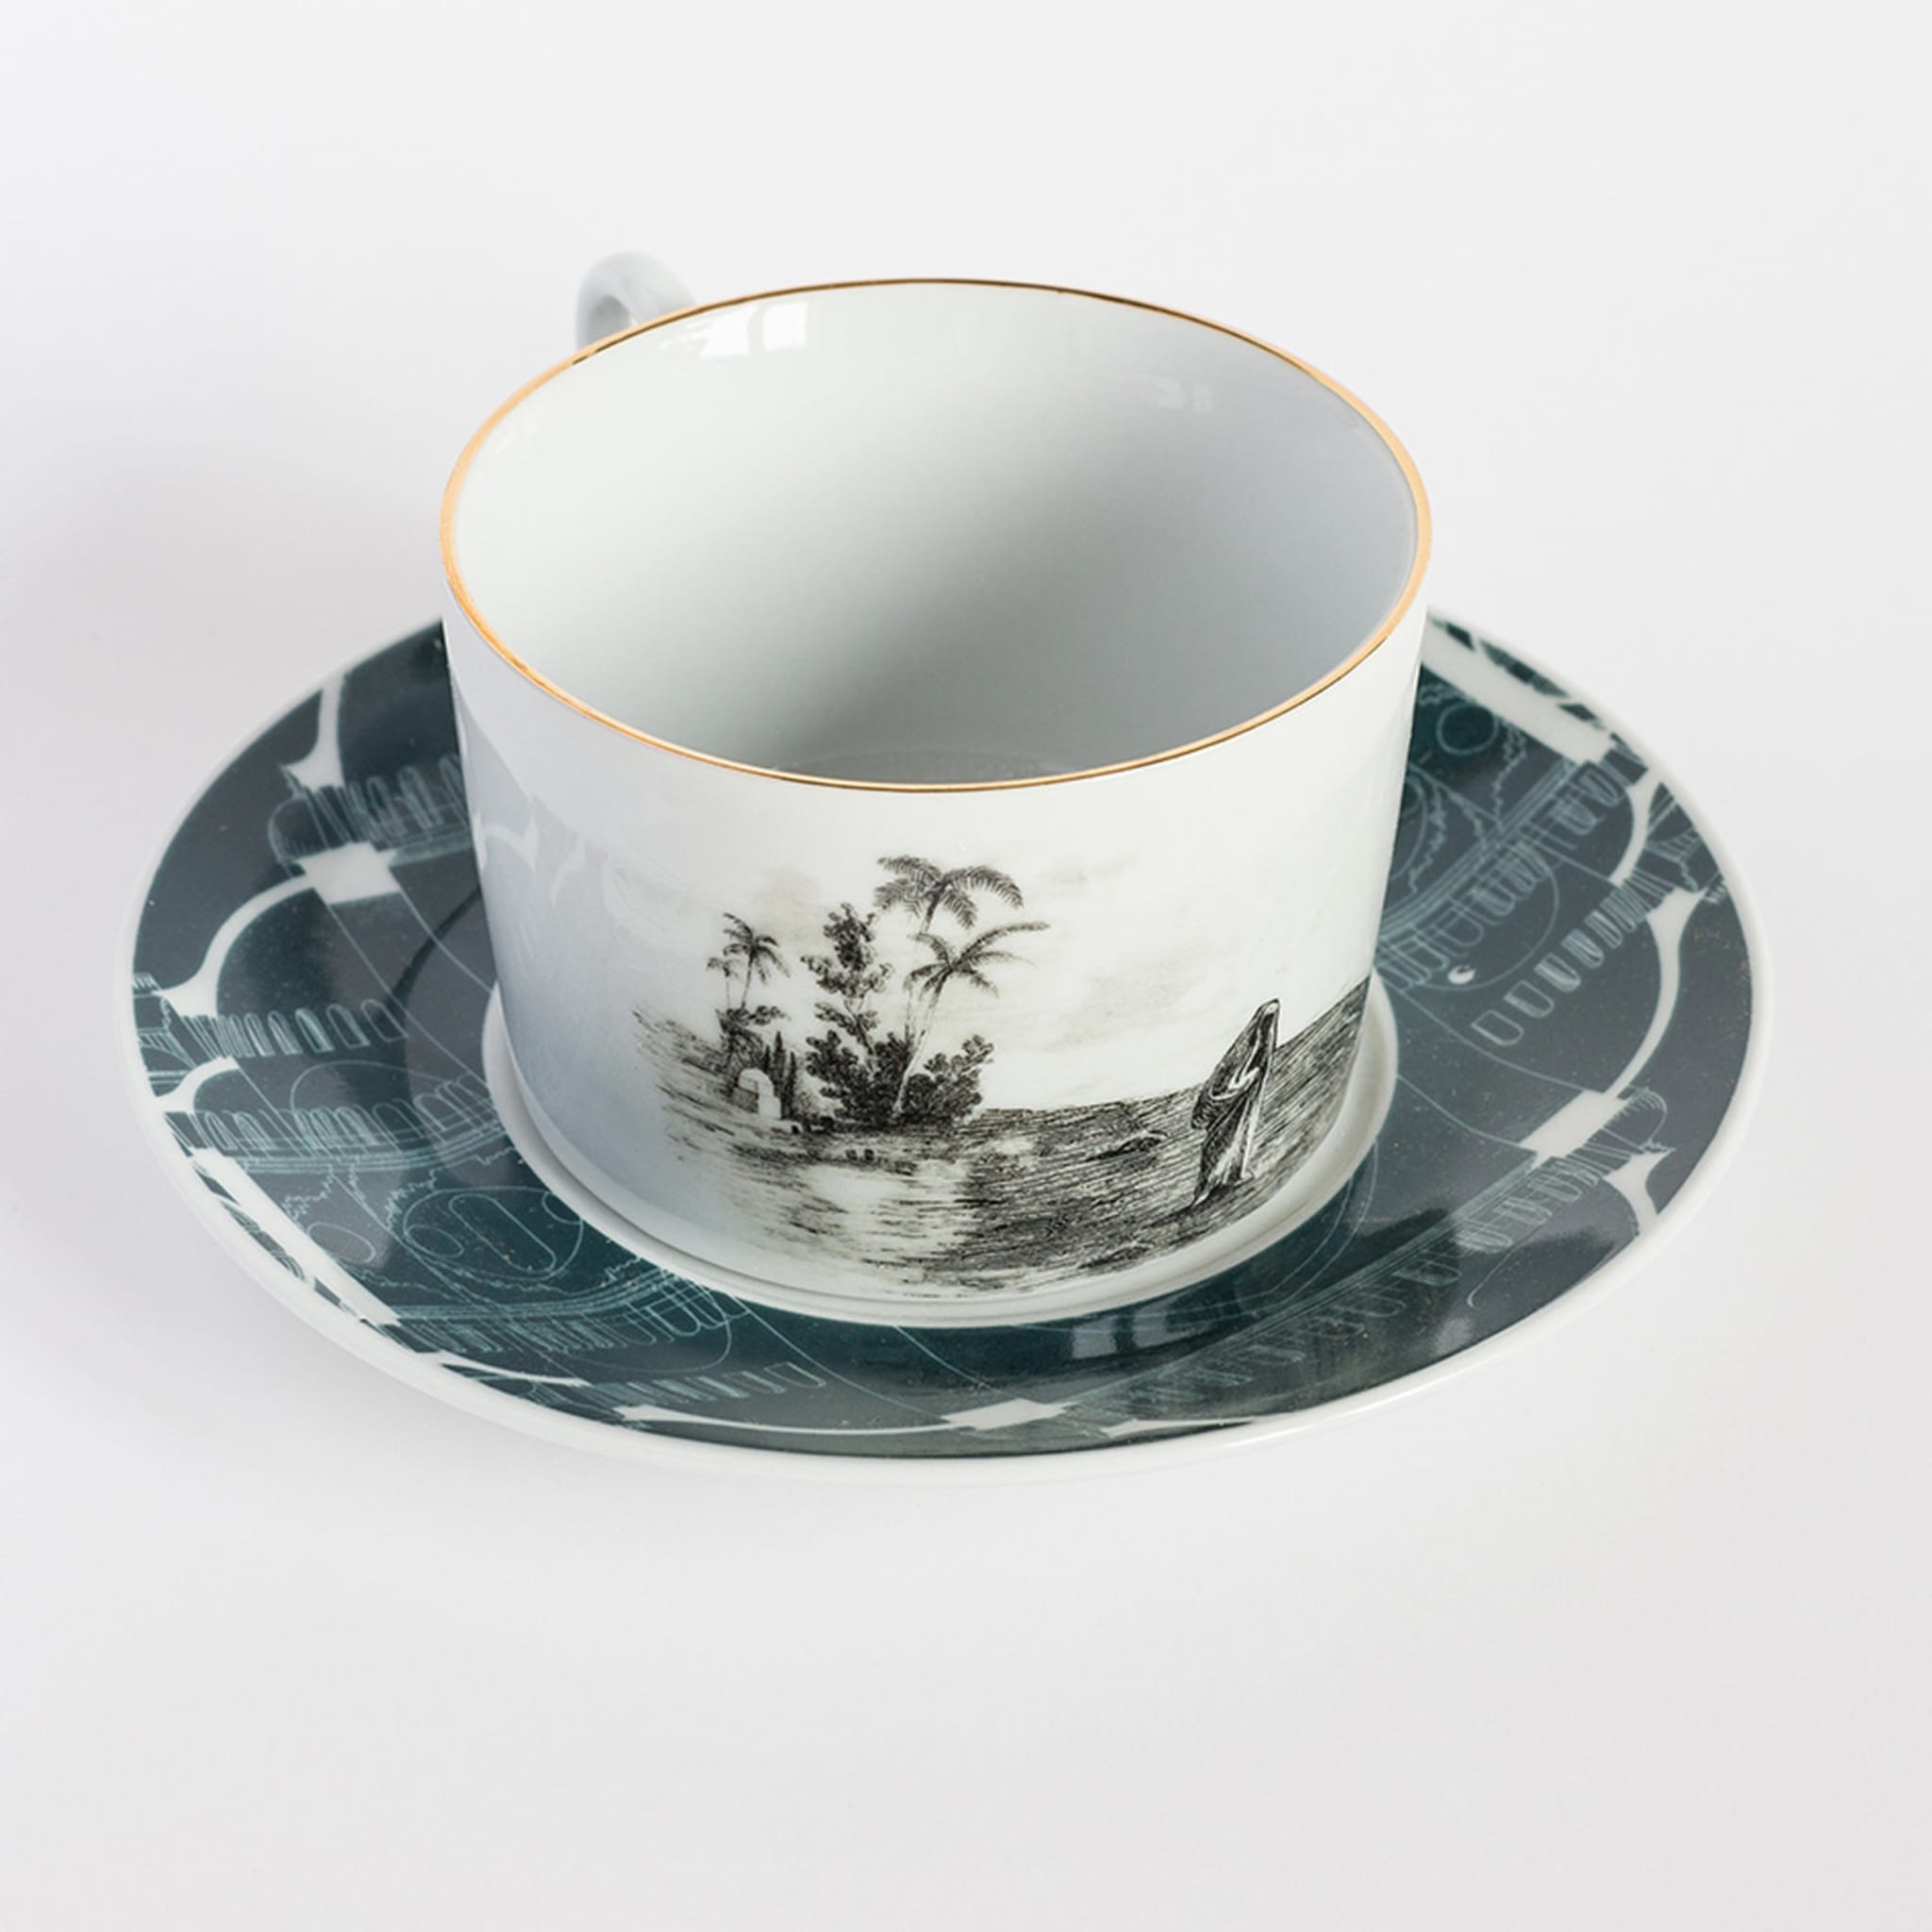 Lebanon Set of 6 Tea Cups with Saucers - Alternative view 2